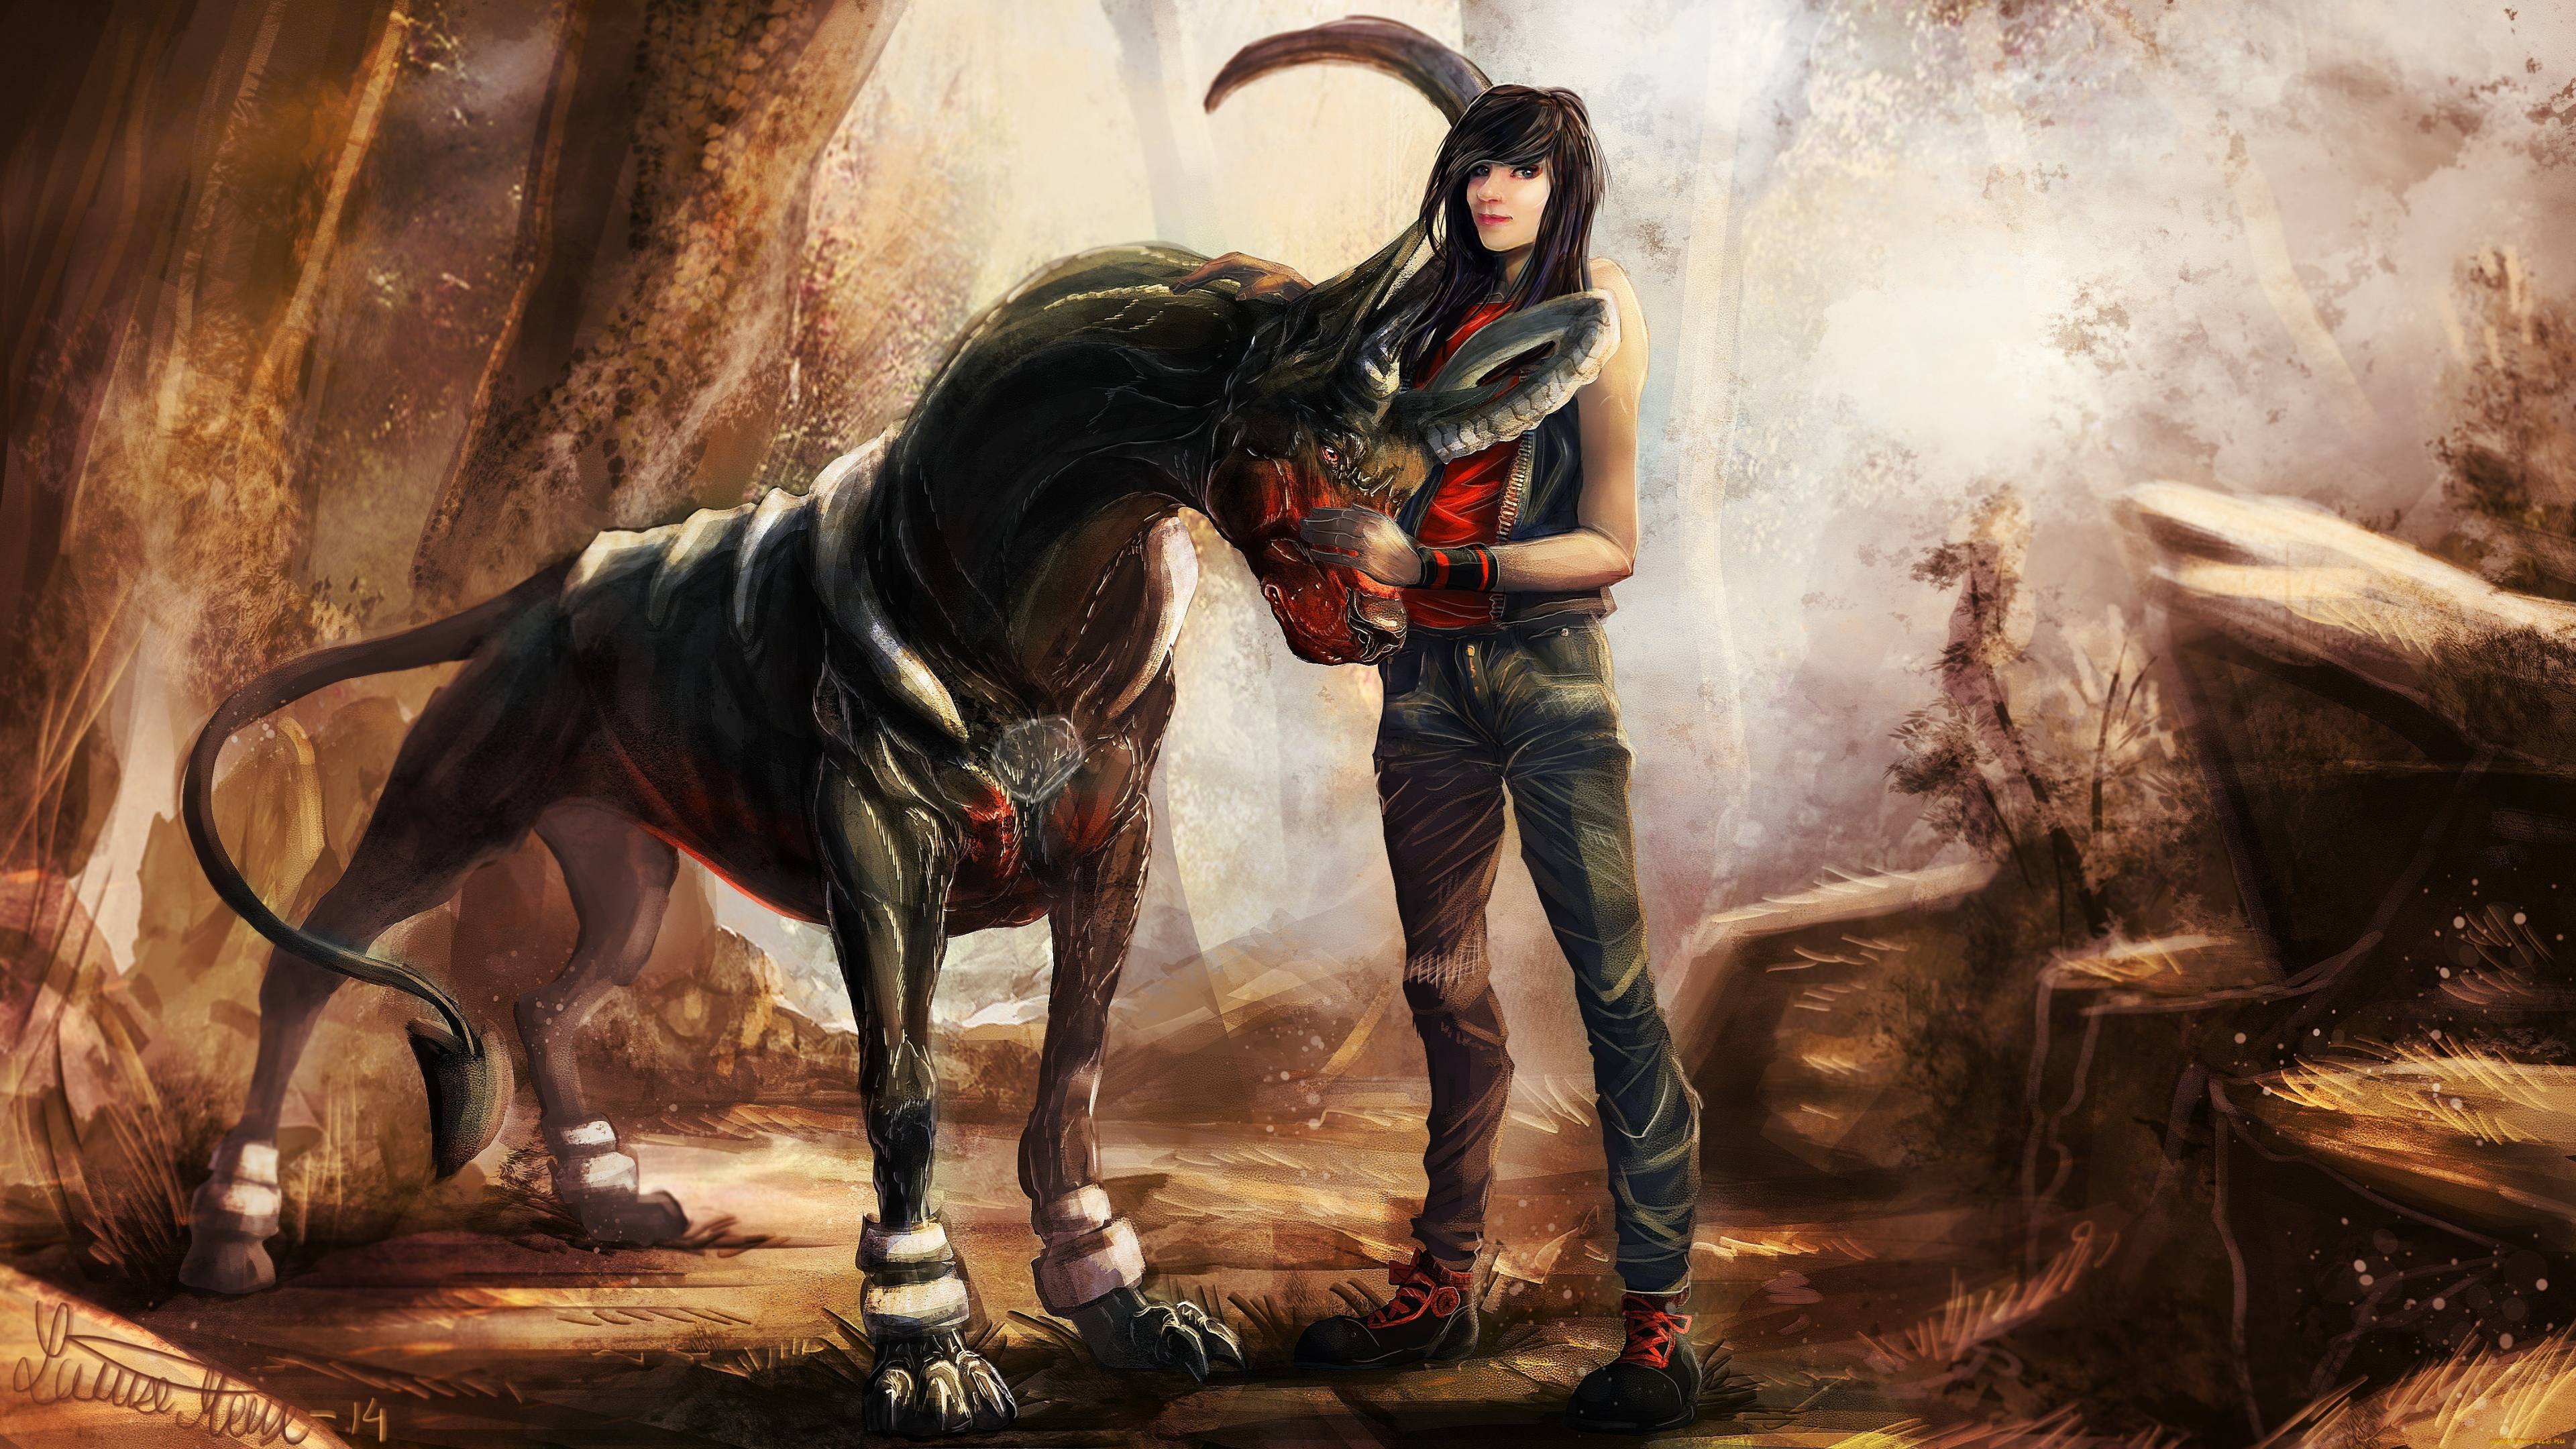 Woman in Black and Red Long Sleeve Shirt and Blue Denim Jeans Standing Beside Black Horse. Wallpaper in 3840x2160 Resolution